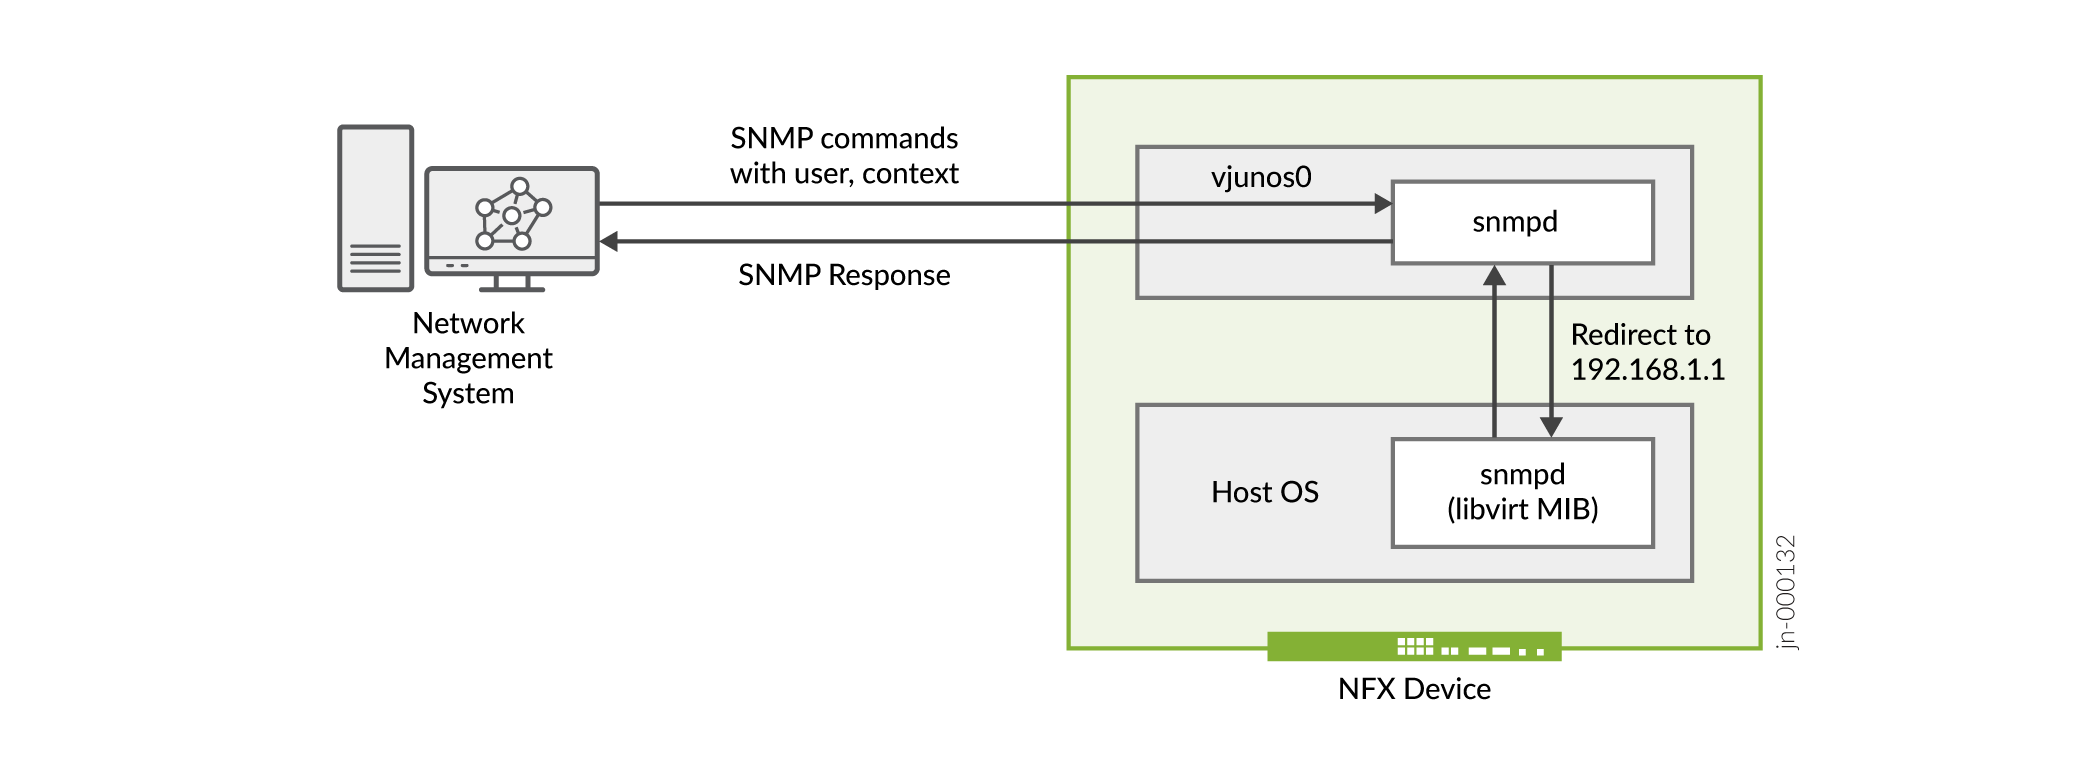 Communication Flow for SNMPv3 on NFX Series Devices